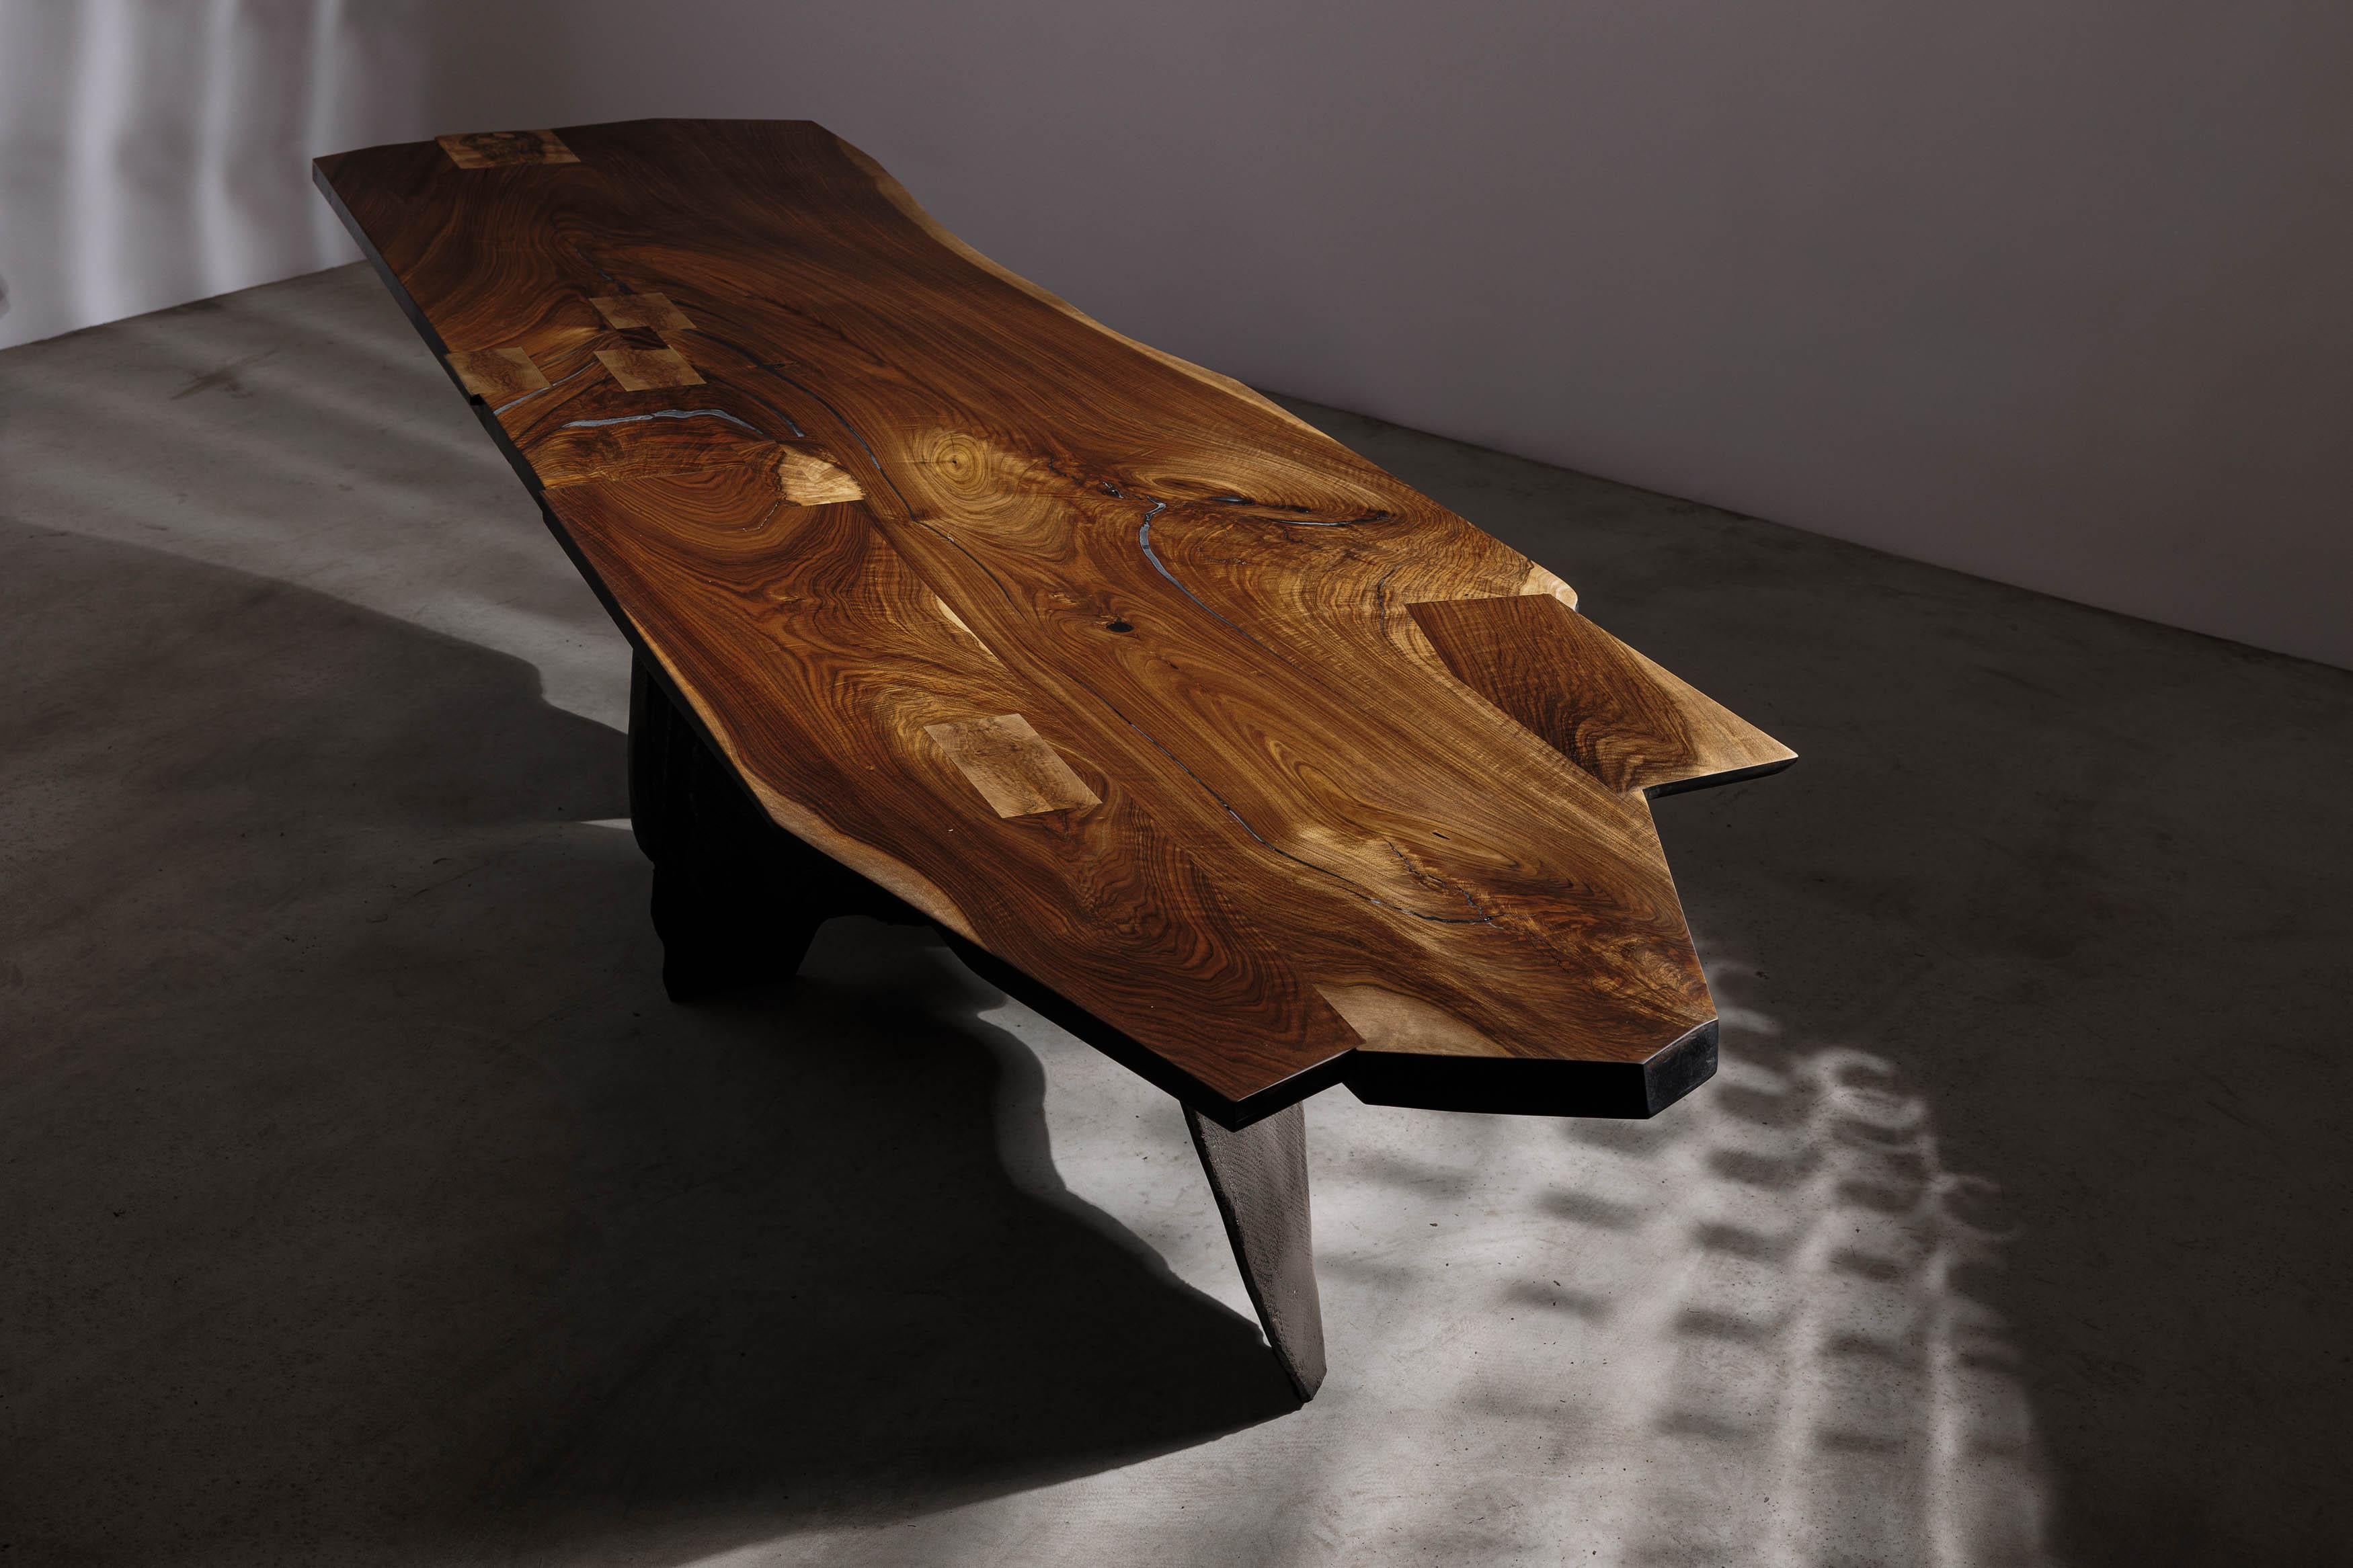 Discover the perfect balance of brutalism and minimalism with our stunning sculptural dining table from Eero Moss studio's latest collection. Crafted with the highest quality materials and meticulous attention to detail, this table showcases a